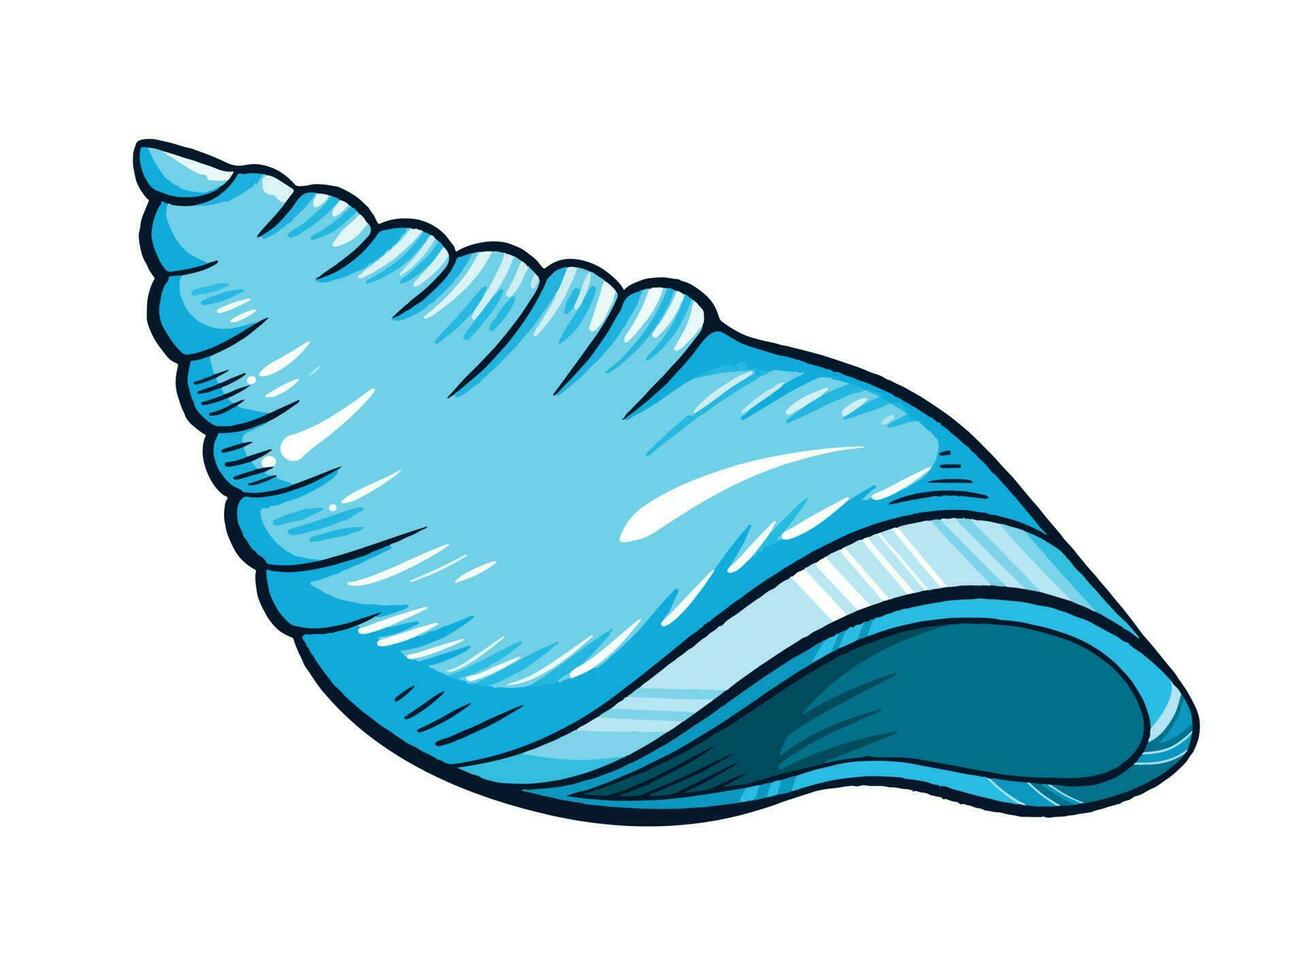 Blue empty sea shell vector illustration isolated on horizontal white background. Nature object art. Simple flat outlined cartoon art styled drawing.